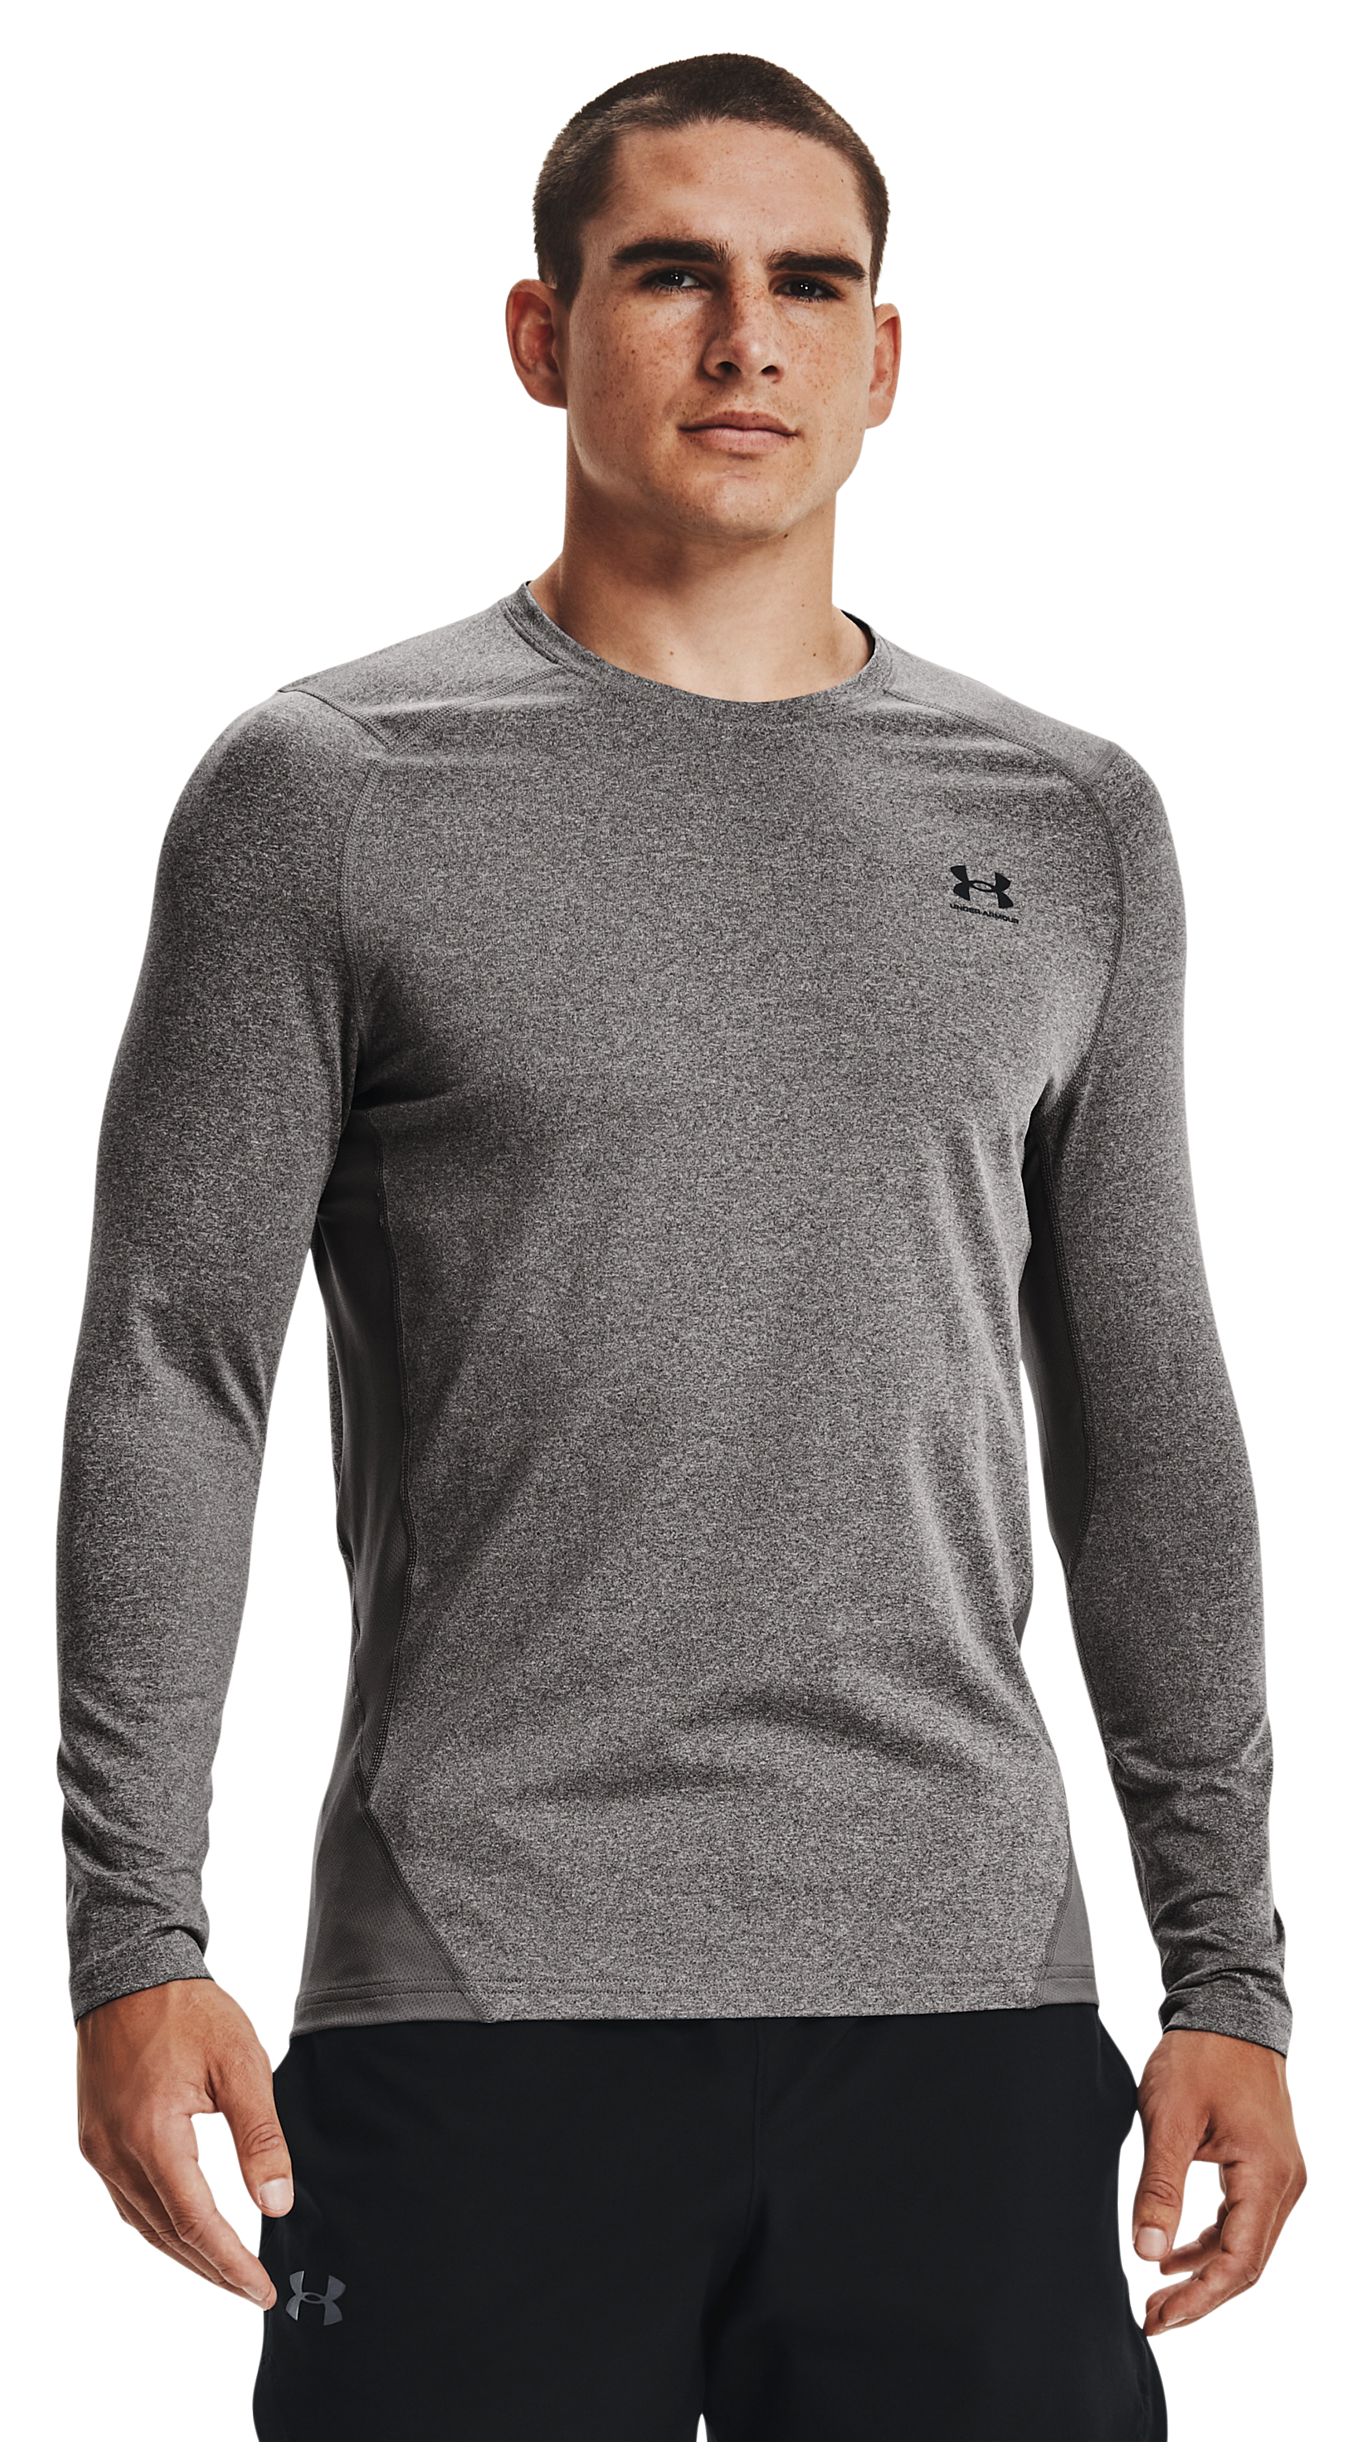 Under Armour ColdGear Fitted Long-Sleeve Crew for Men - Charcoal Light Heather/Black - XLT